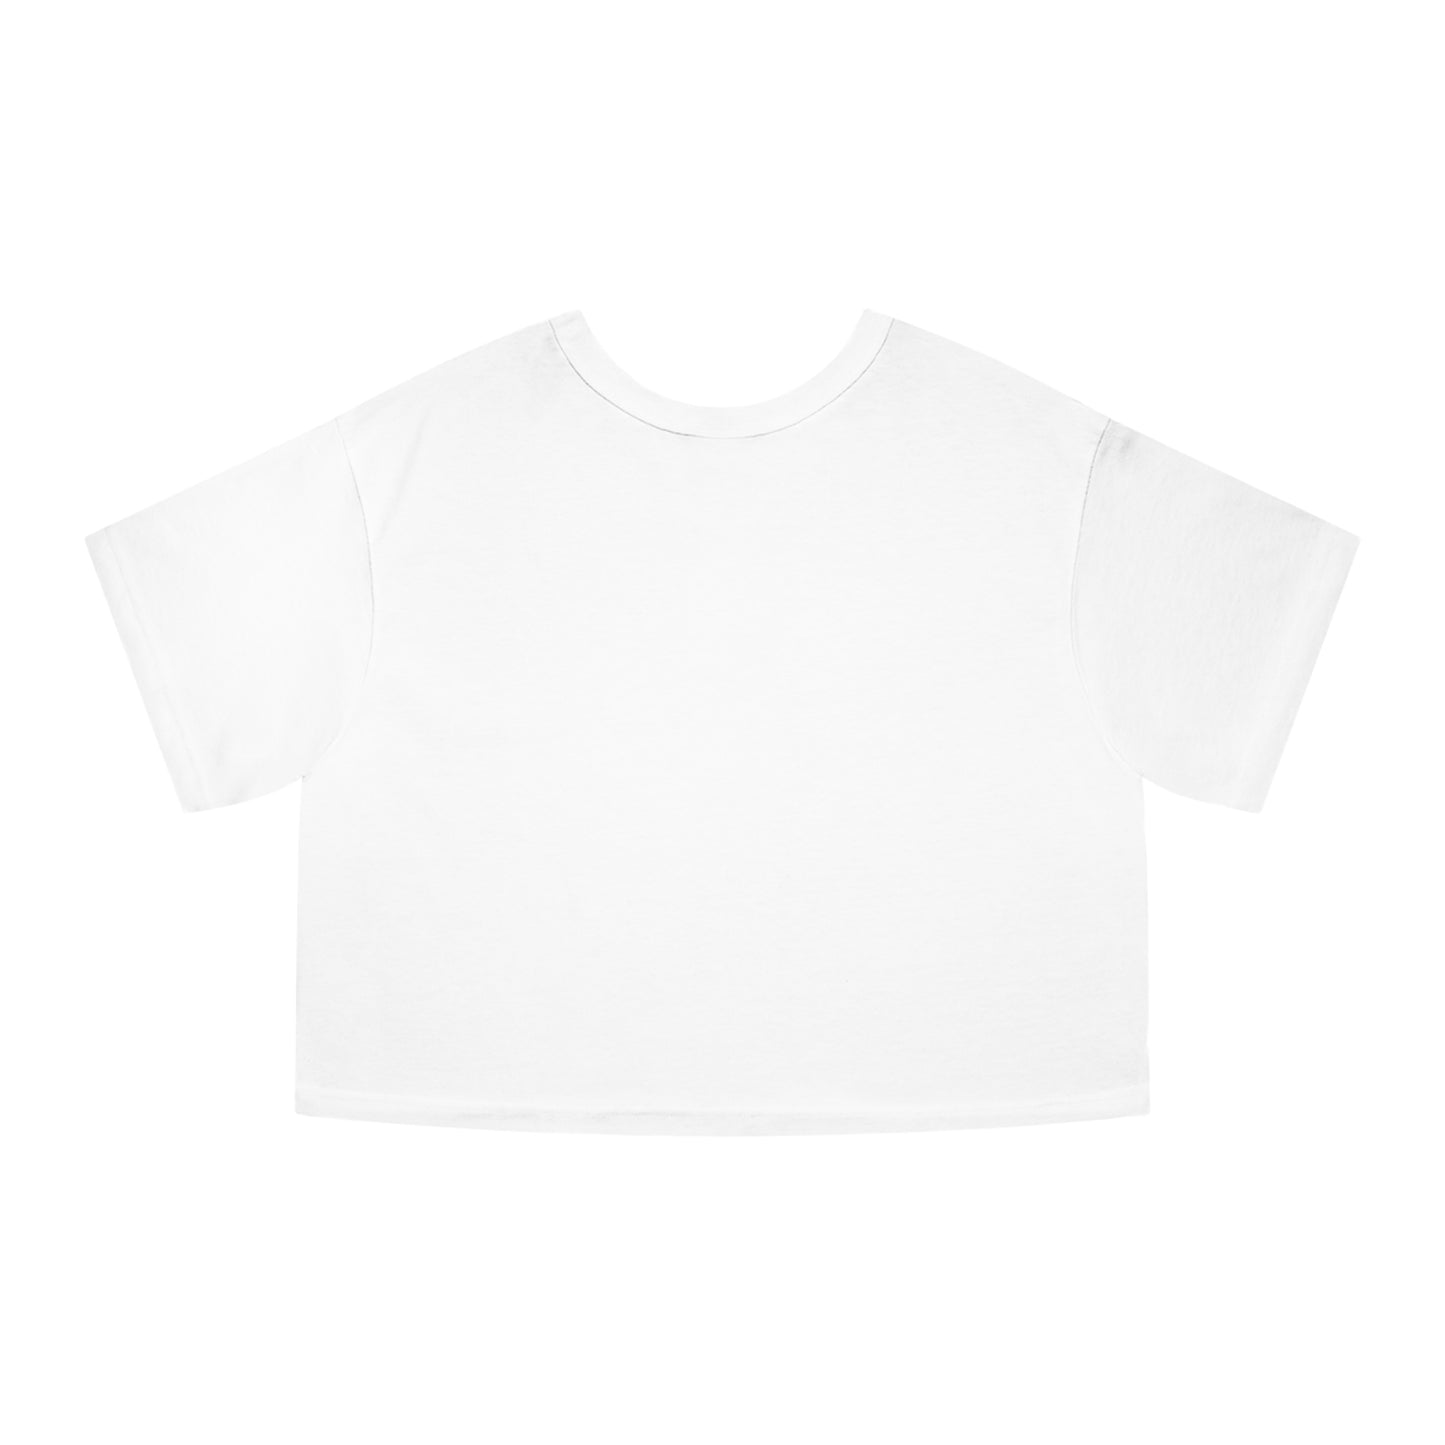 Claireandmoon Logo Champion Women's Heritage Cropped T-Shirt